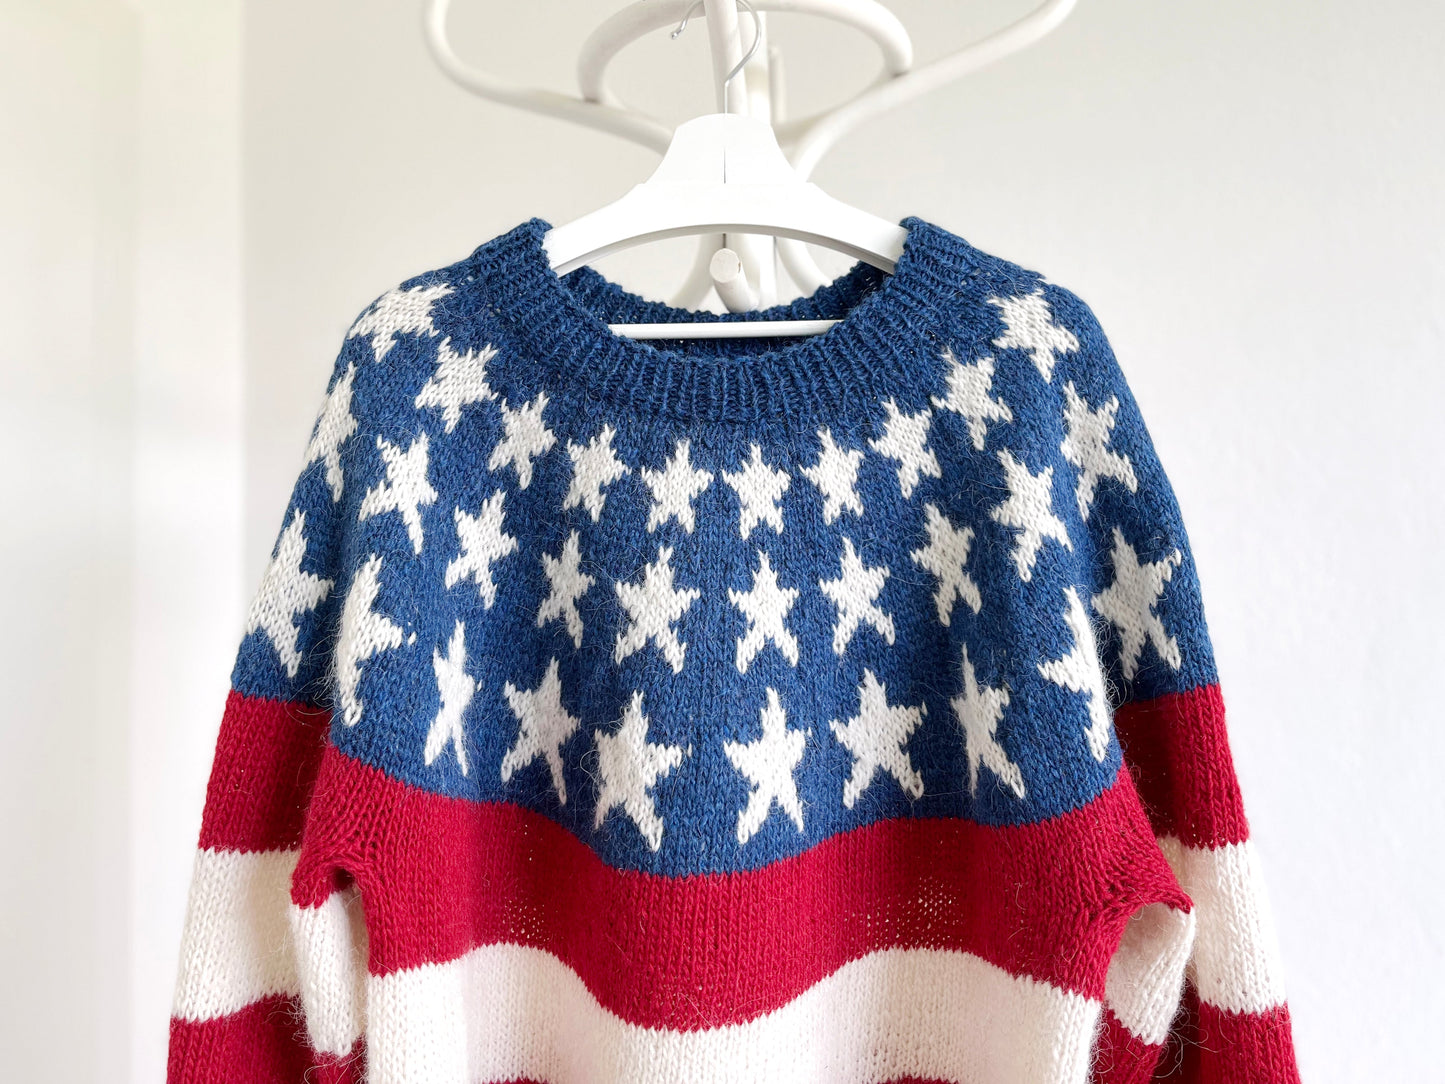 Hand-knitted lopapeysa sweater in the USA FLAG design made with pure Icelandic wool